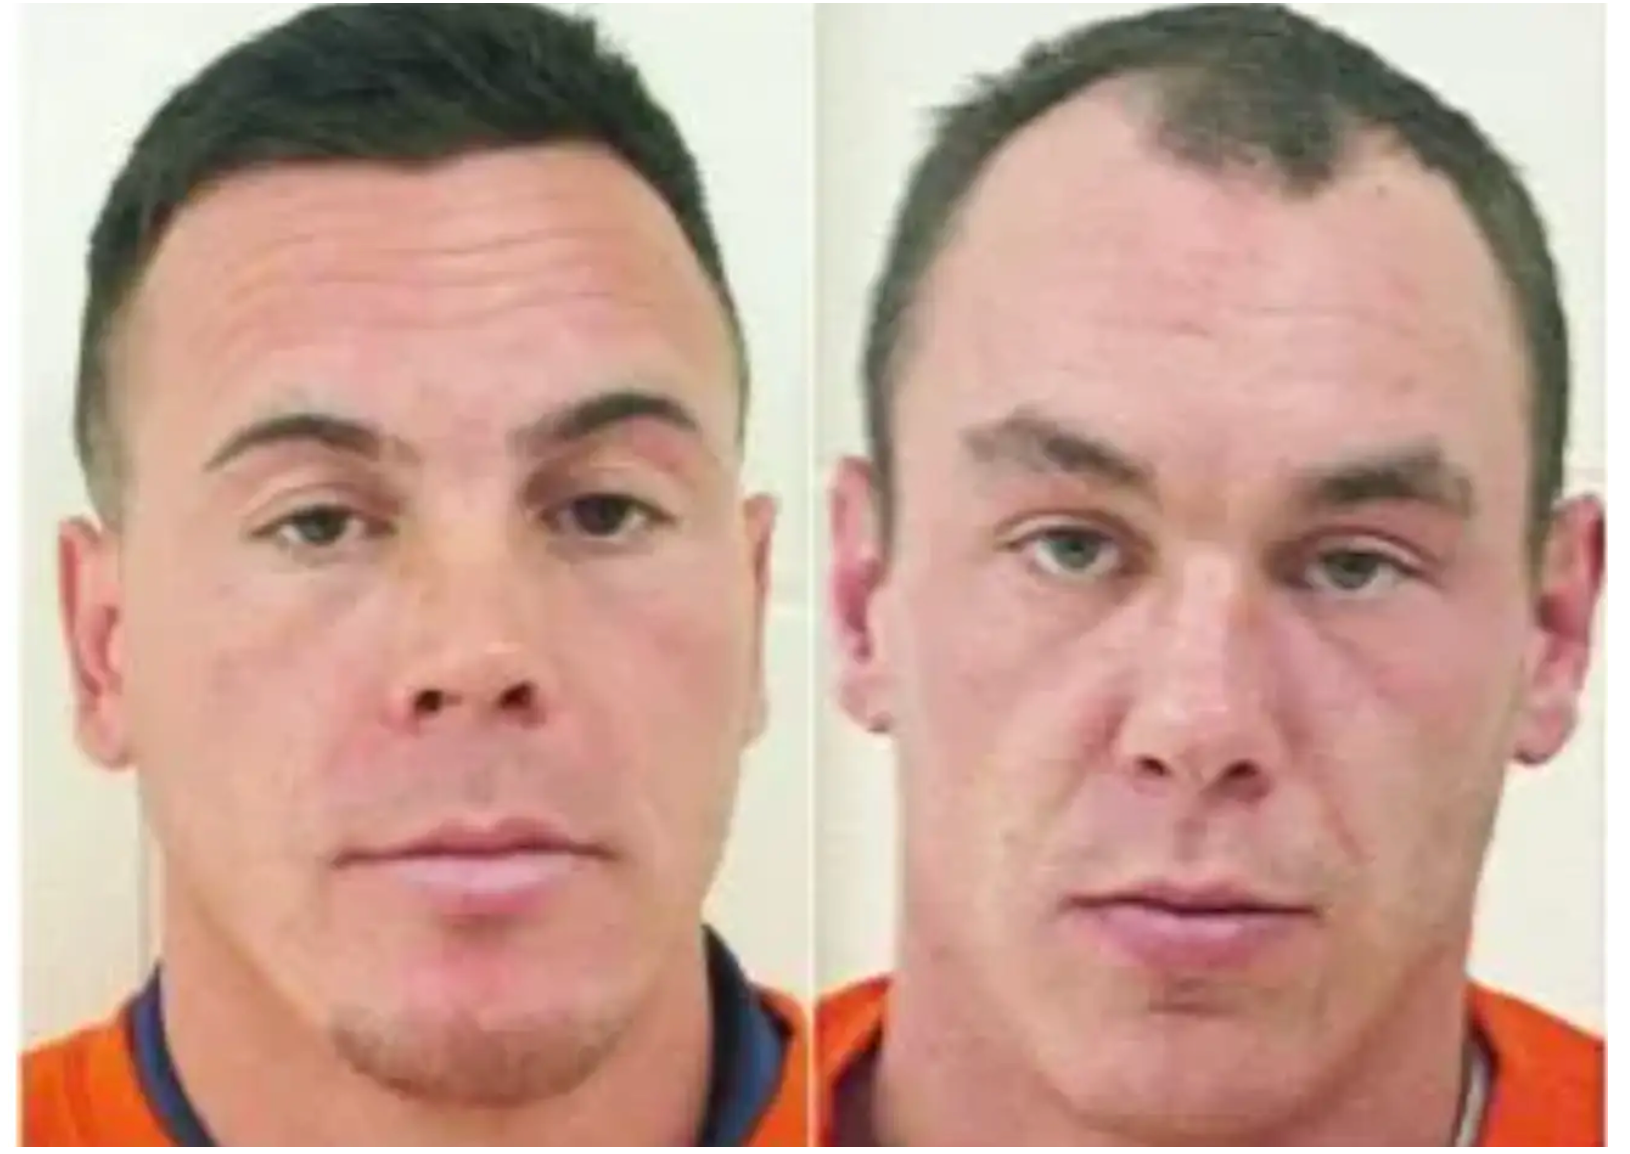 Two White Men Must Pay $1.25 Million For Racially Motivated Attack Against Black Man In Maine